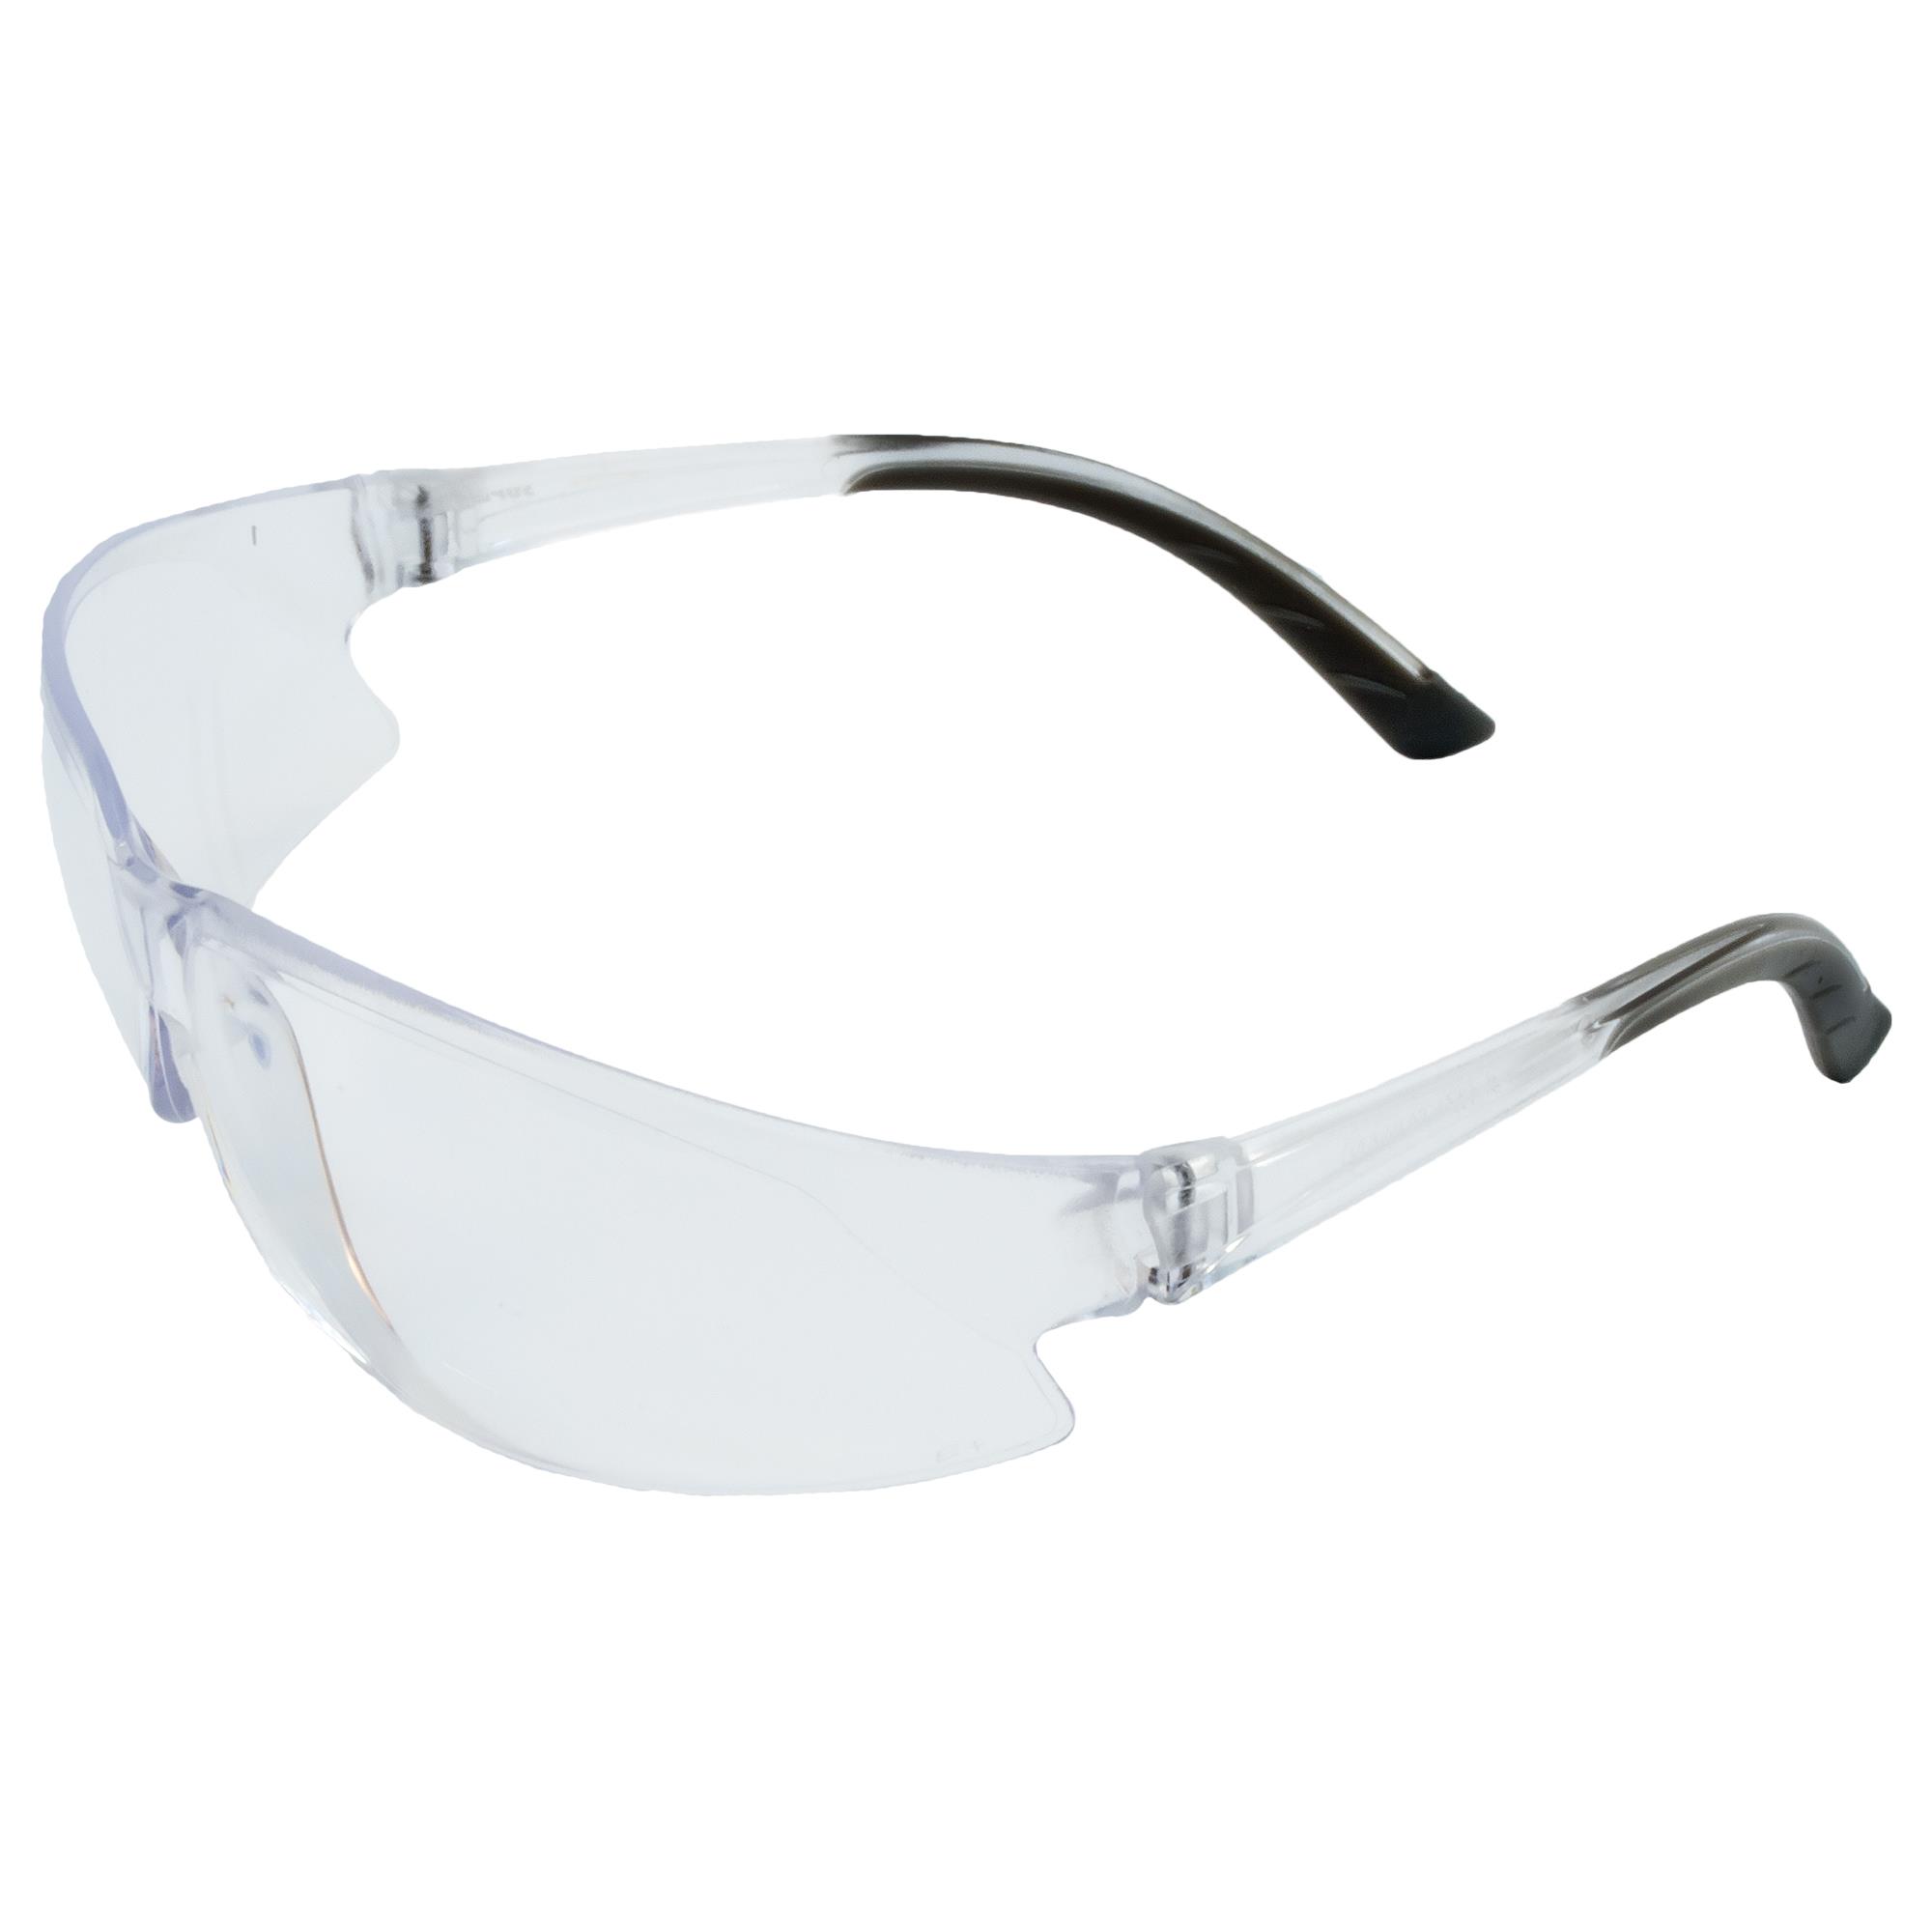 Gray Frame with Anti-Fog Lens ERB Safety 16516 Superbs Safety Glasses Plastic One Size 